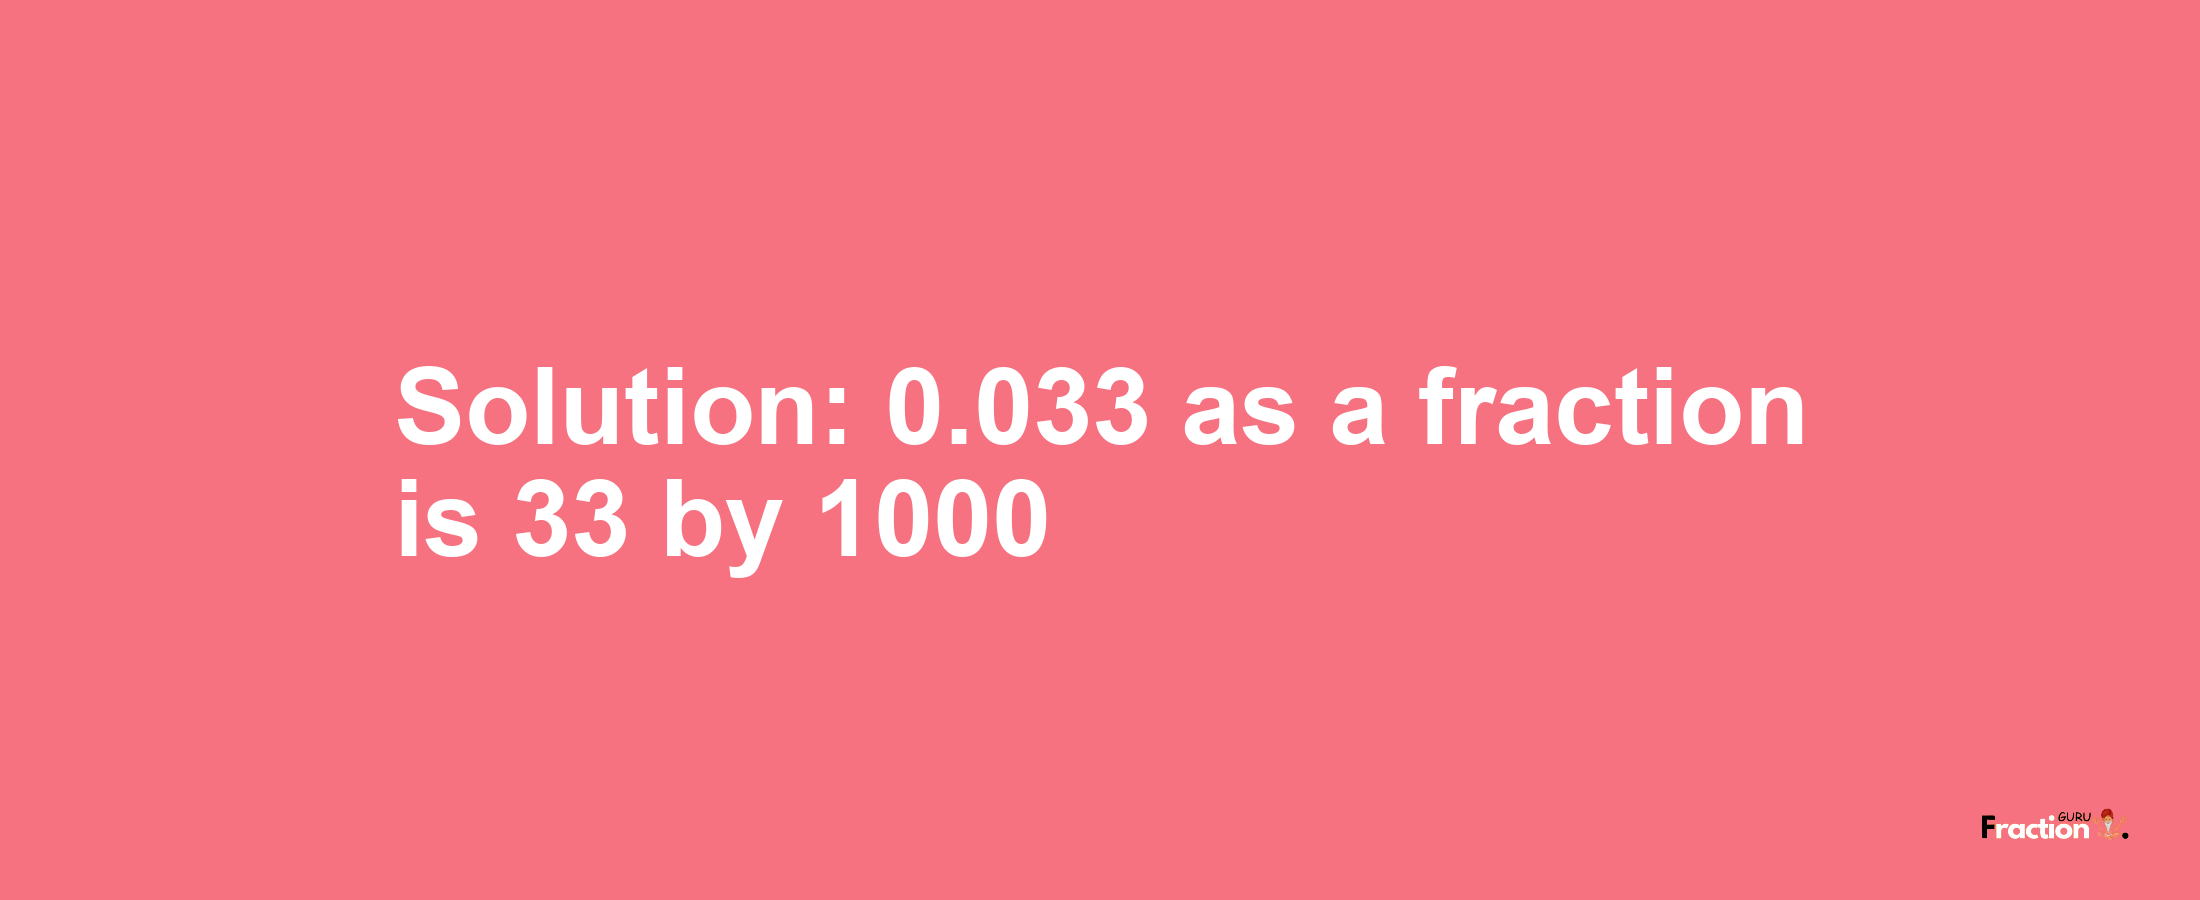 Solution:0.033 as a fraction is 33/1000